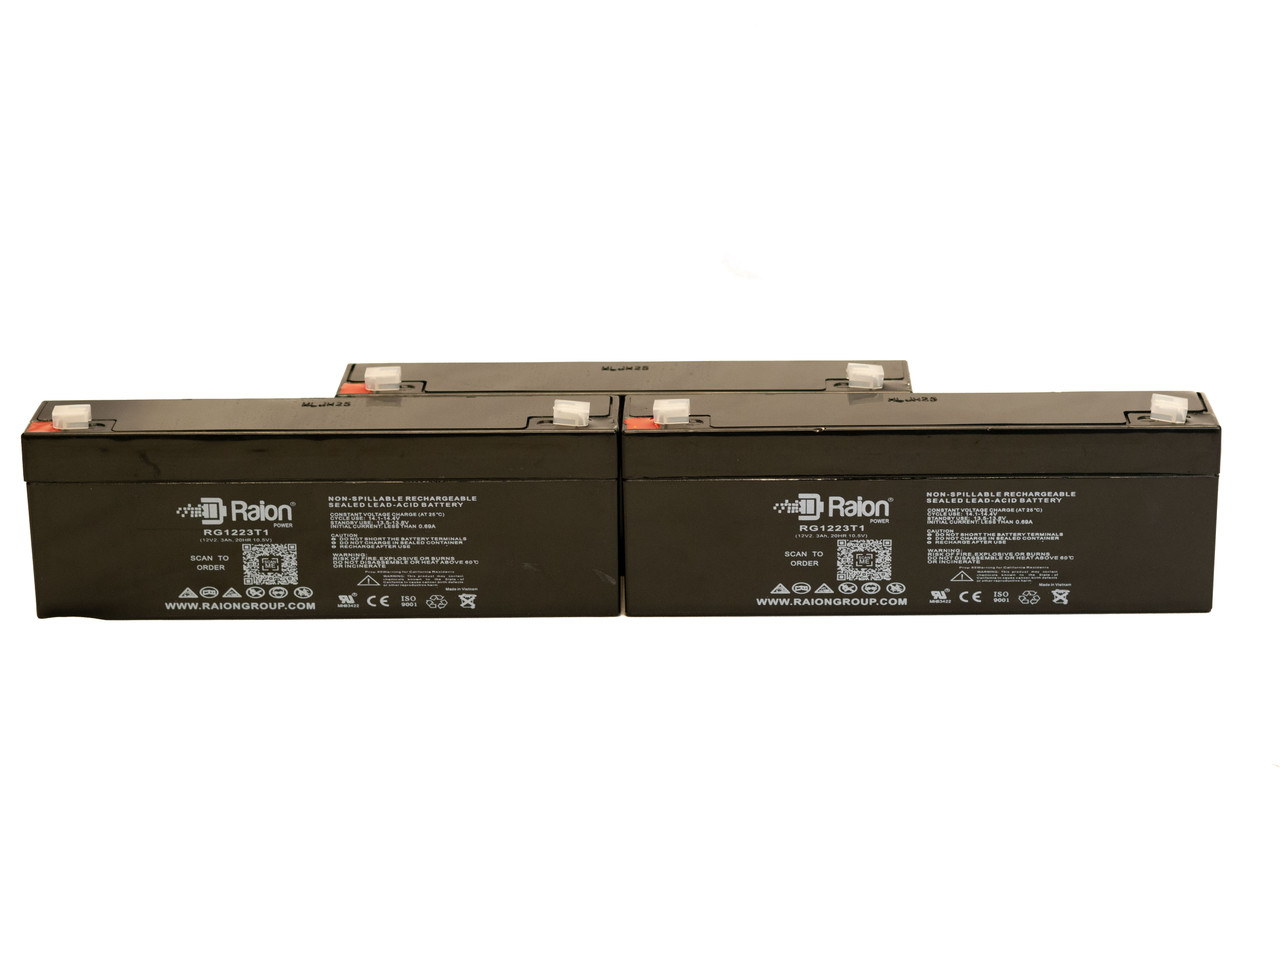 Raion Power 12V 2.3Ah RG1223T1 Replacement Medical Battery for Bci International 6200 - 3 Pack